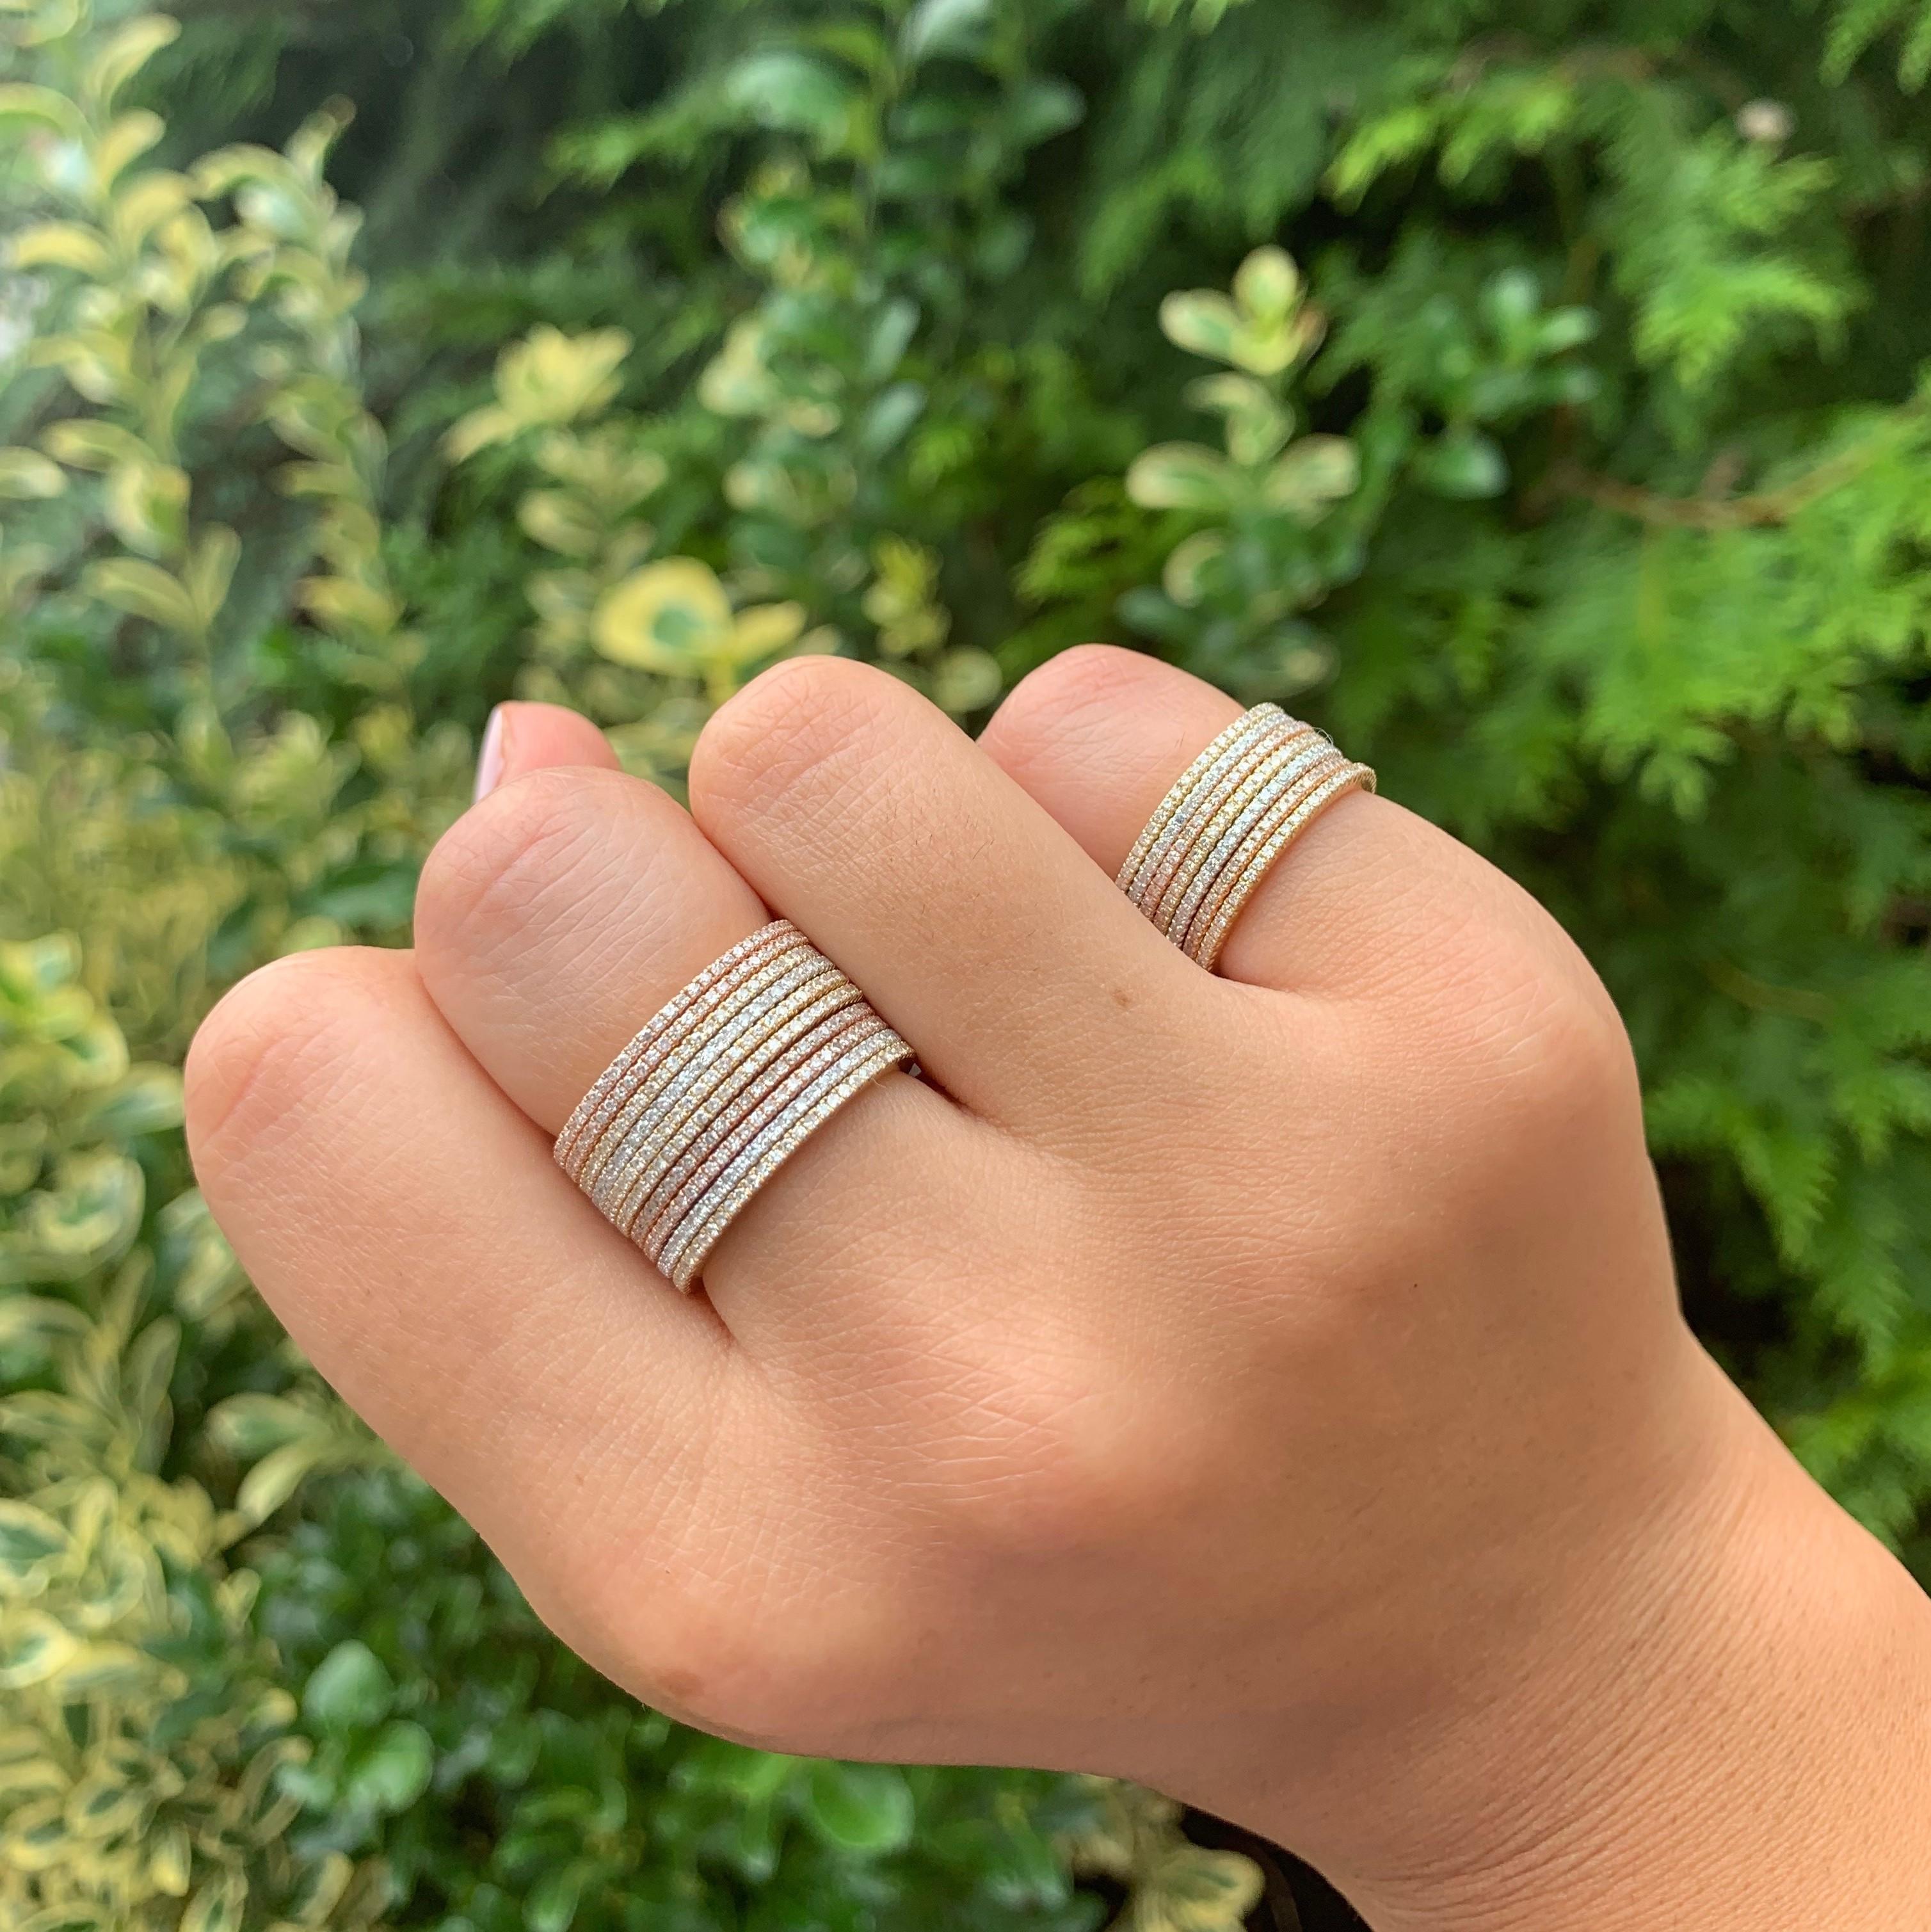 This ring is a must-have for every woman's jewelry wardrobe. It is a delicate beautiful and sparkly diamond stackable eternity band. This simple, elegant piece features a 14-karat gold construction with 18 points of round-cut sparkling white